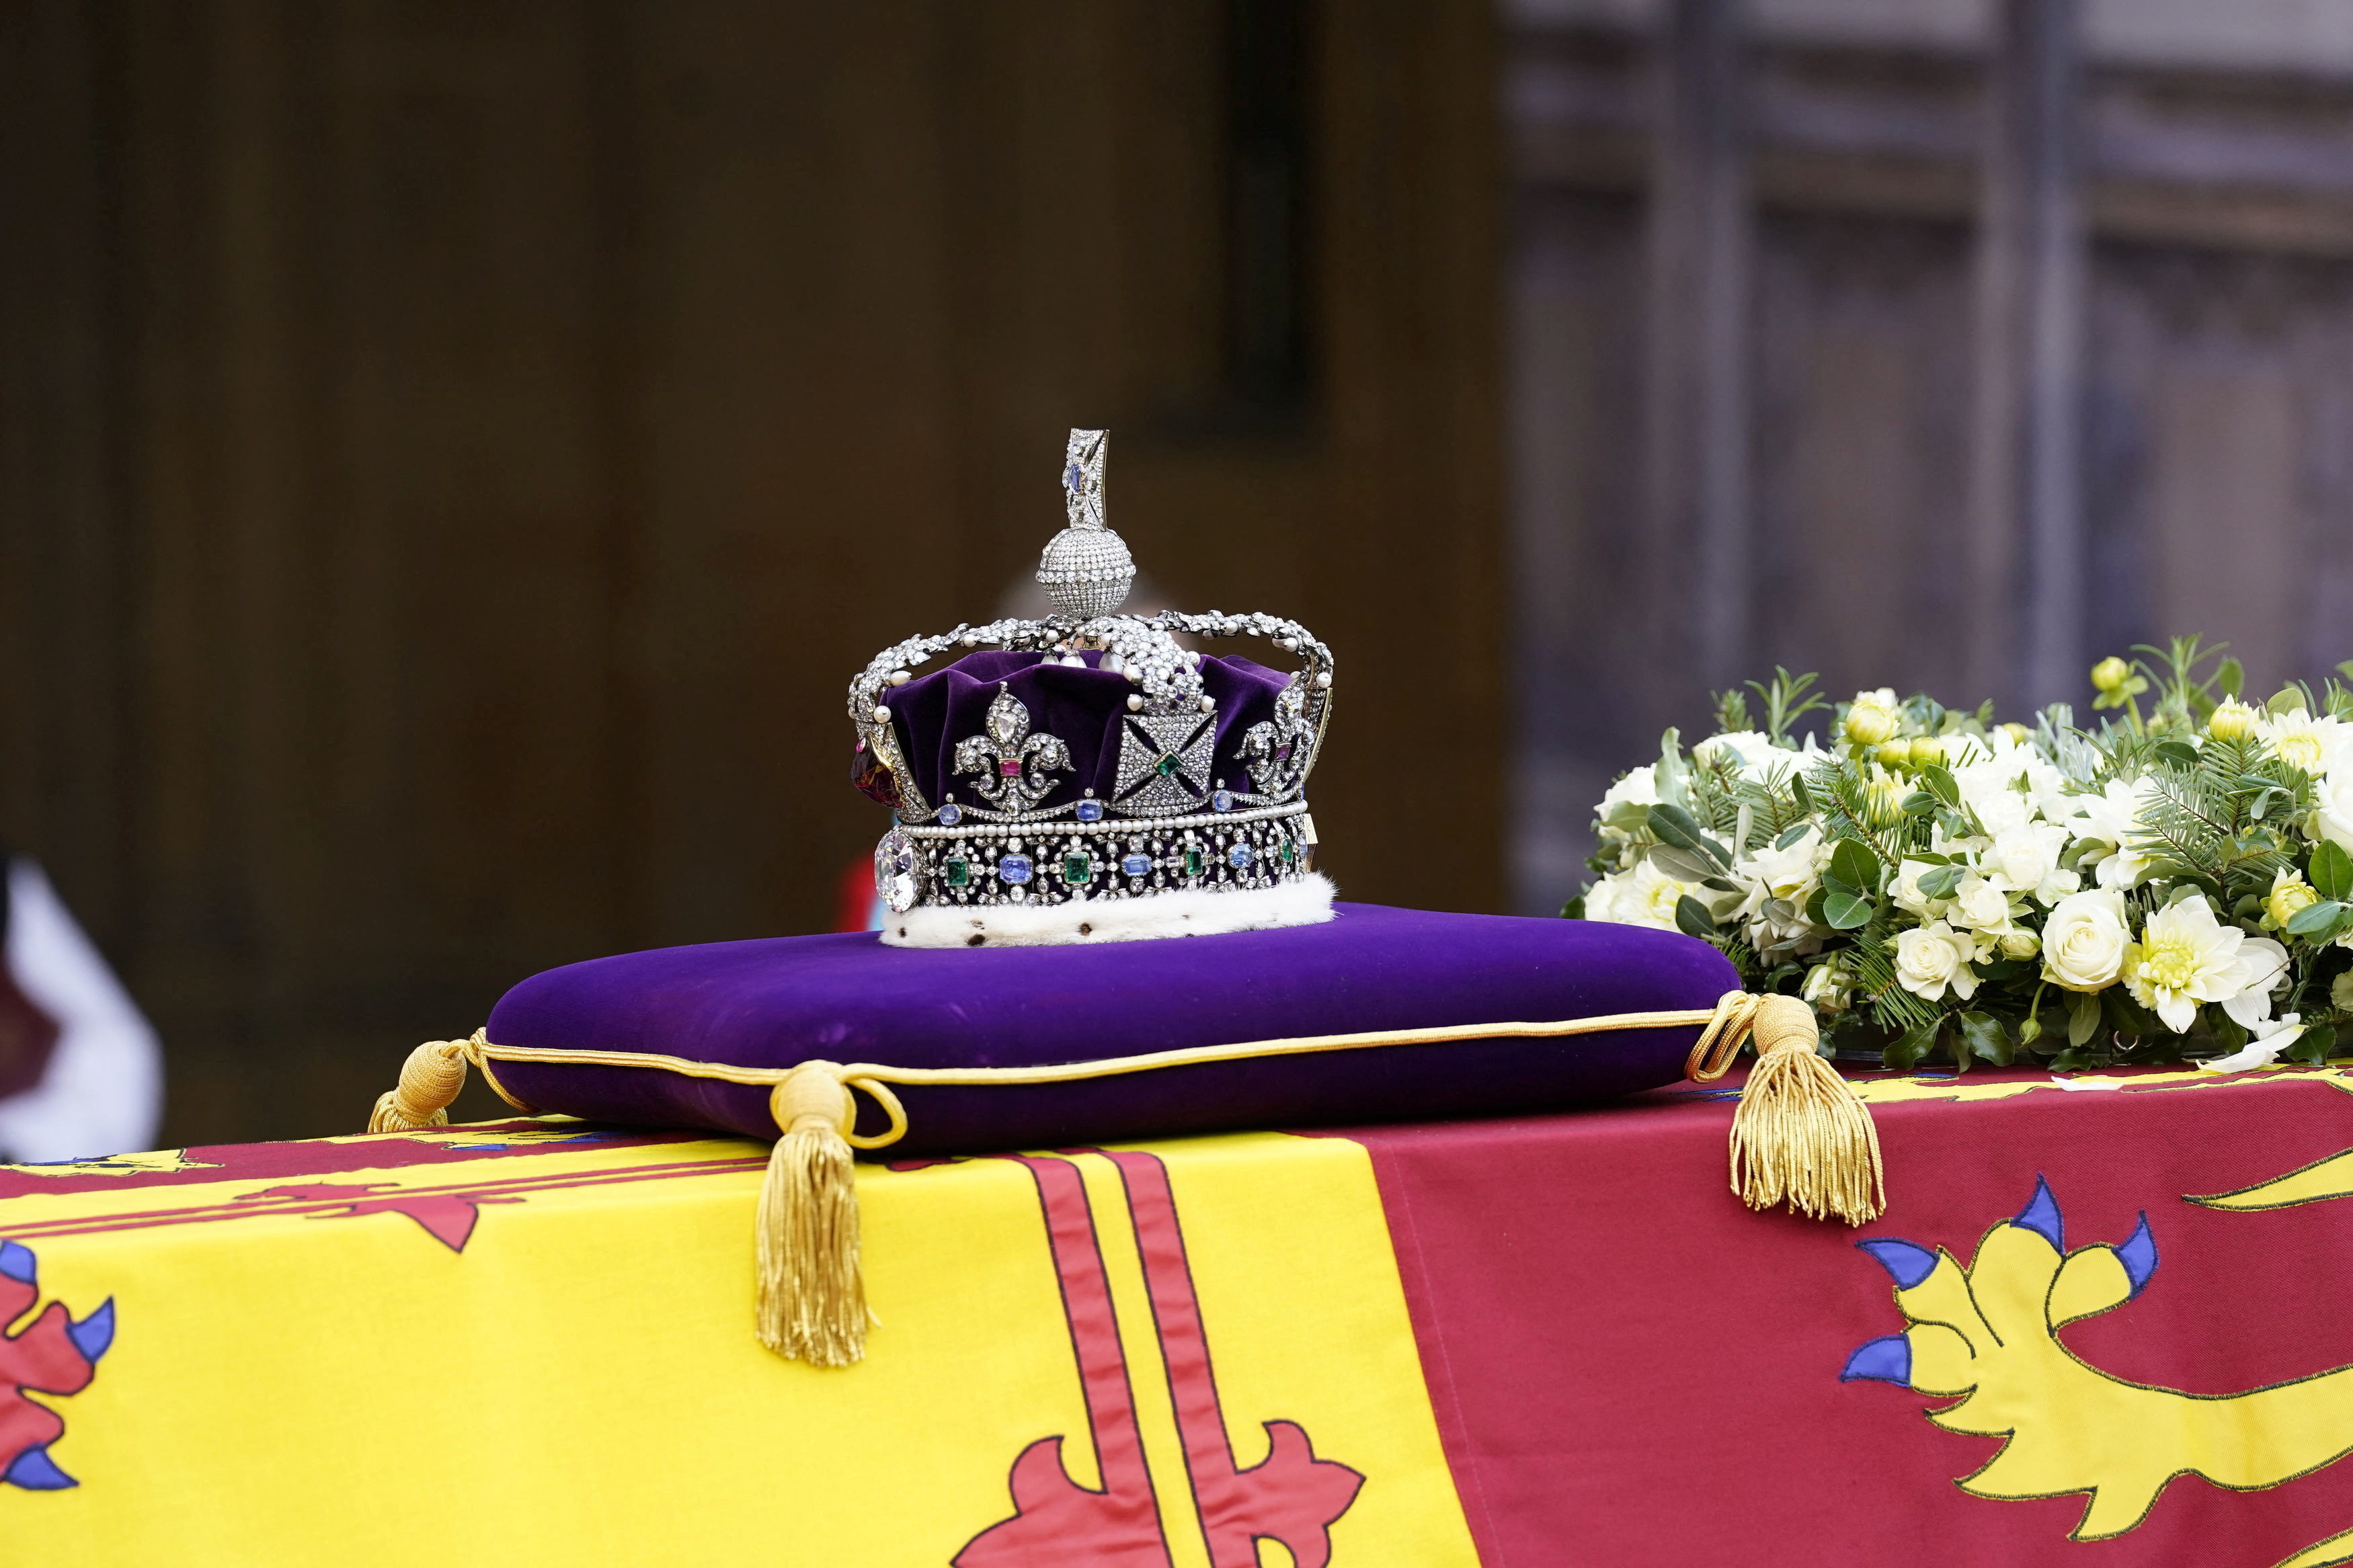 The coffin of queen elizabeth ii is draped in a royal banner, with the crown of the royal state placed on top